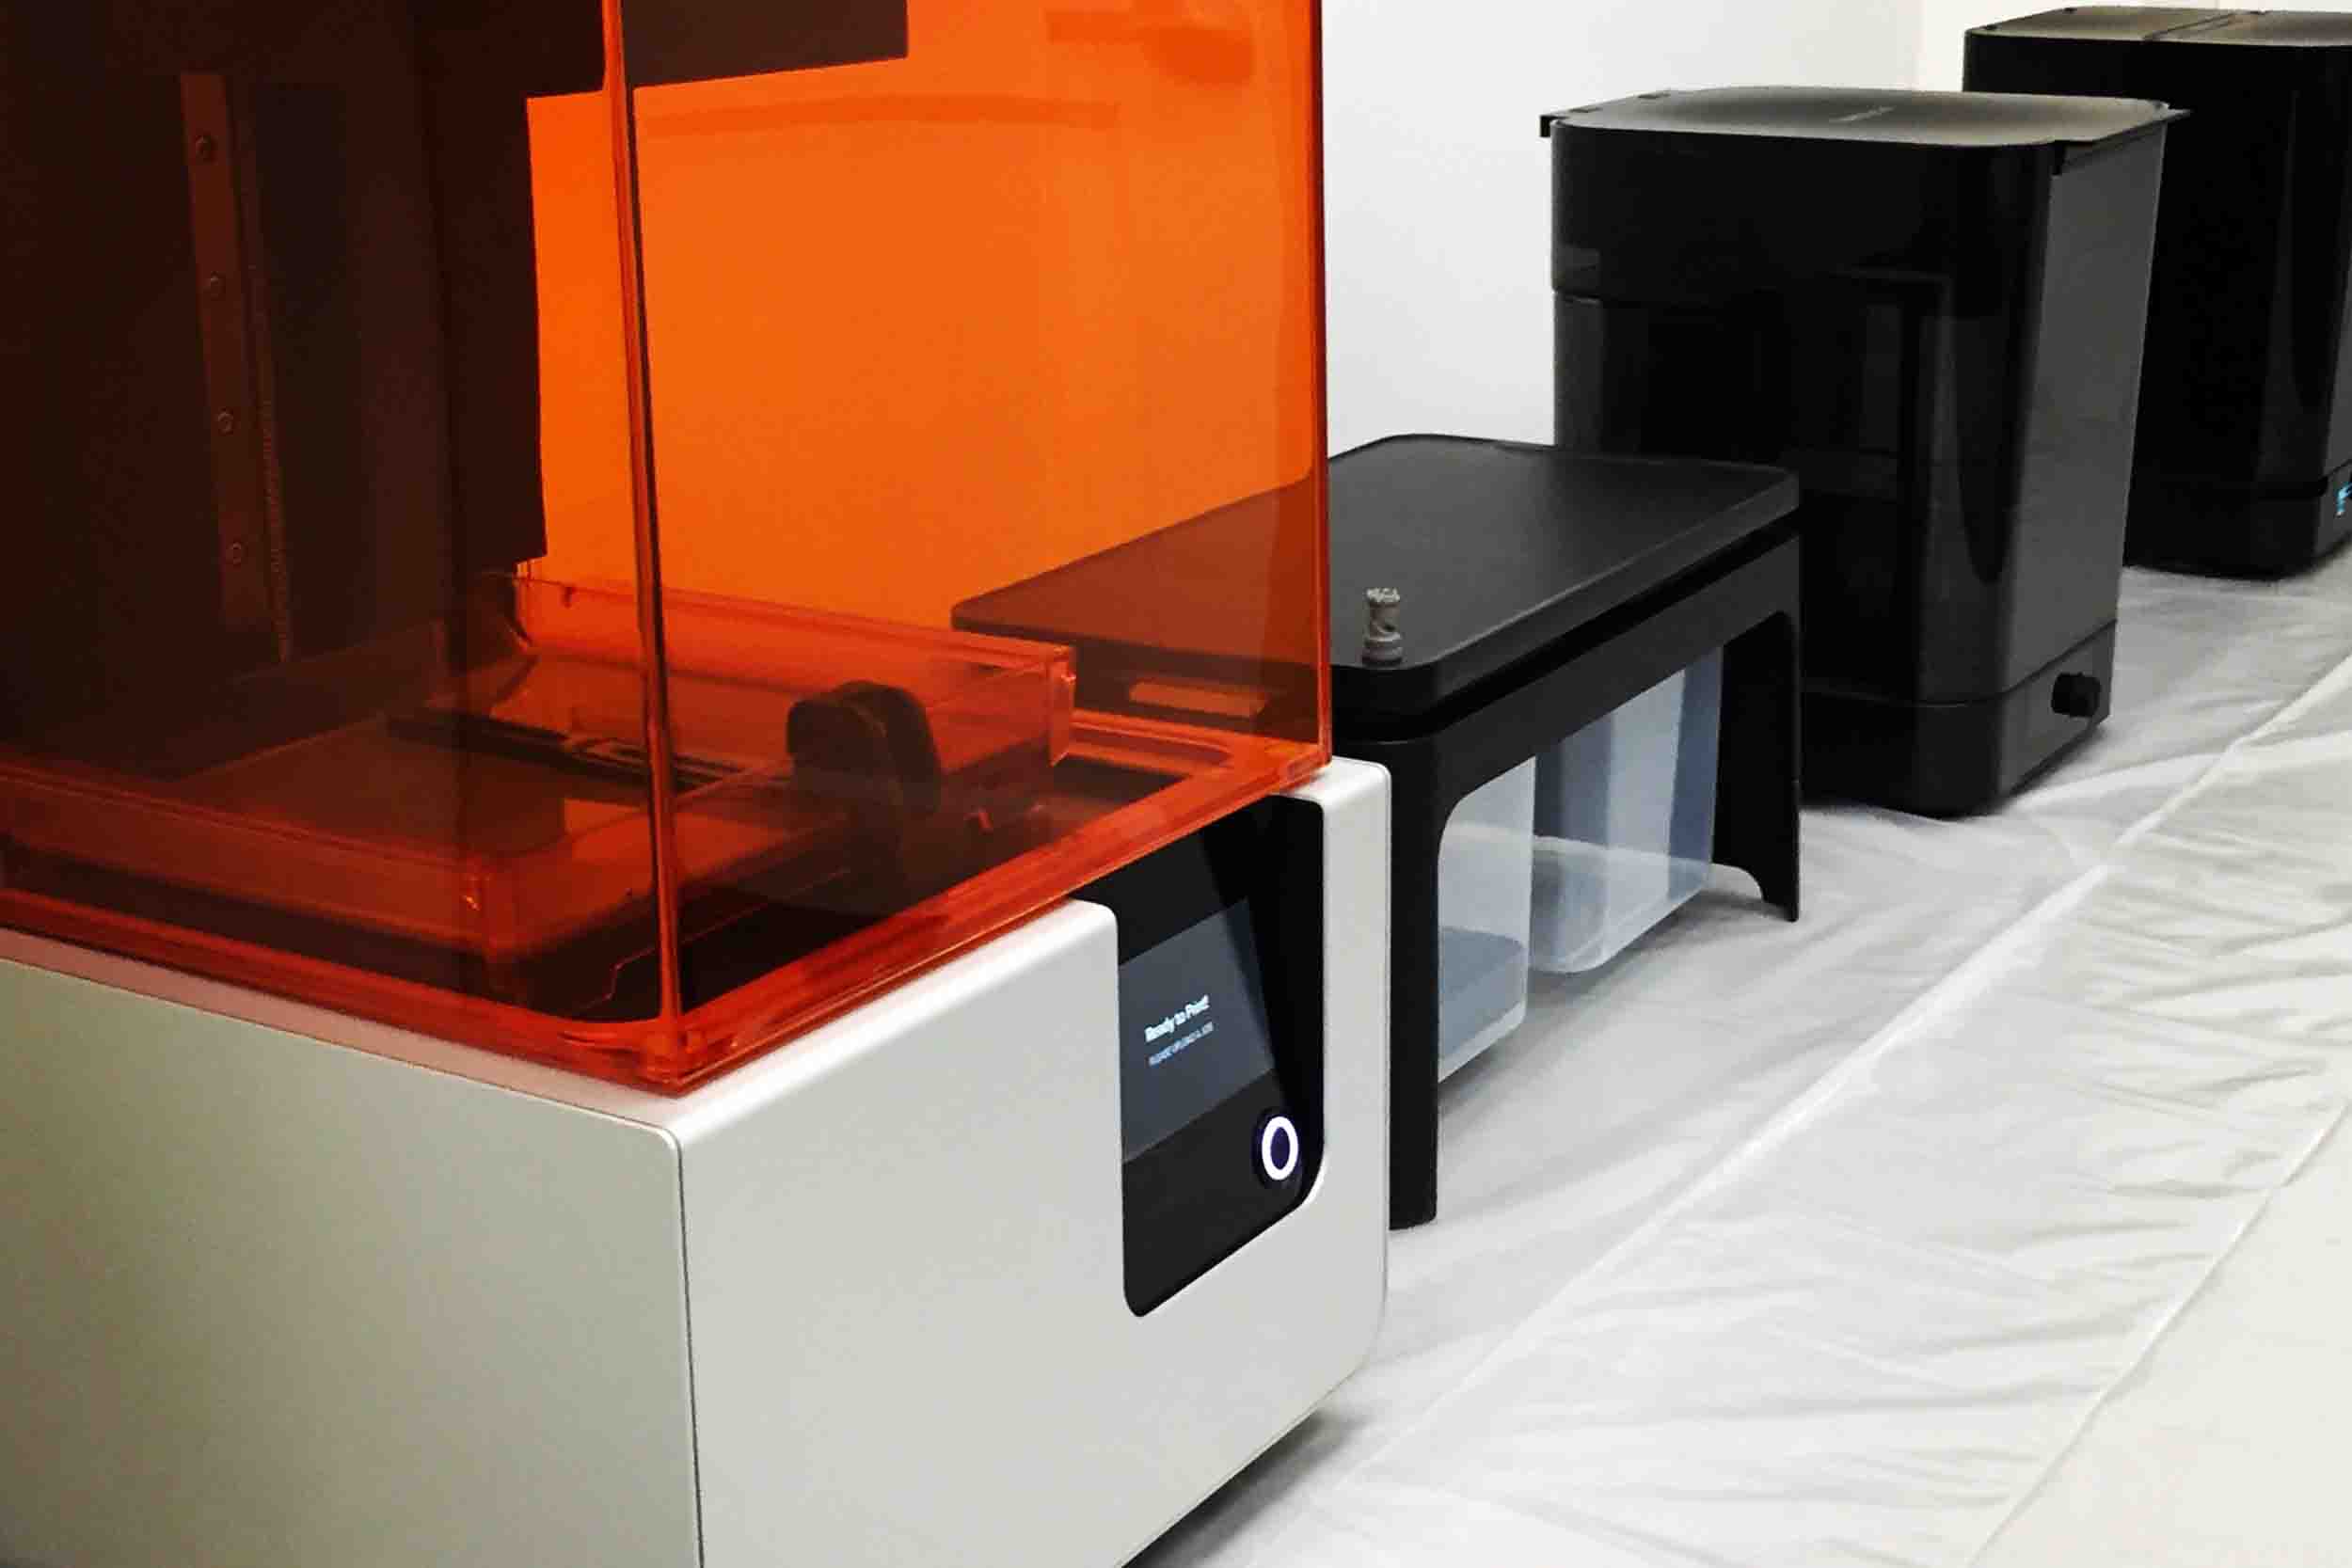 Stereolithography at the Innovation Hub